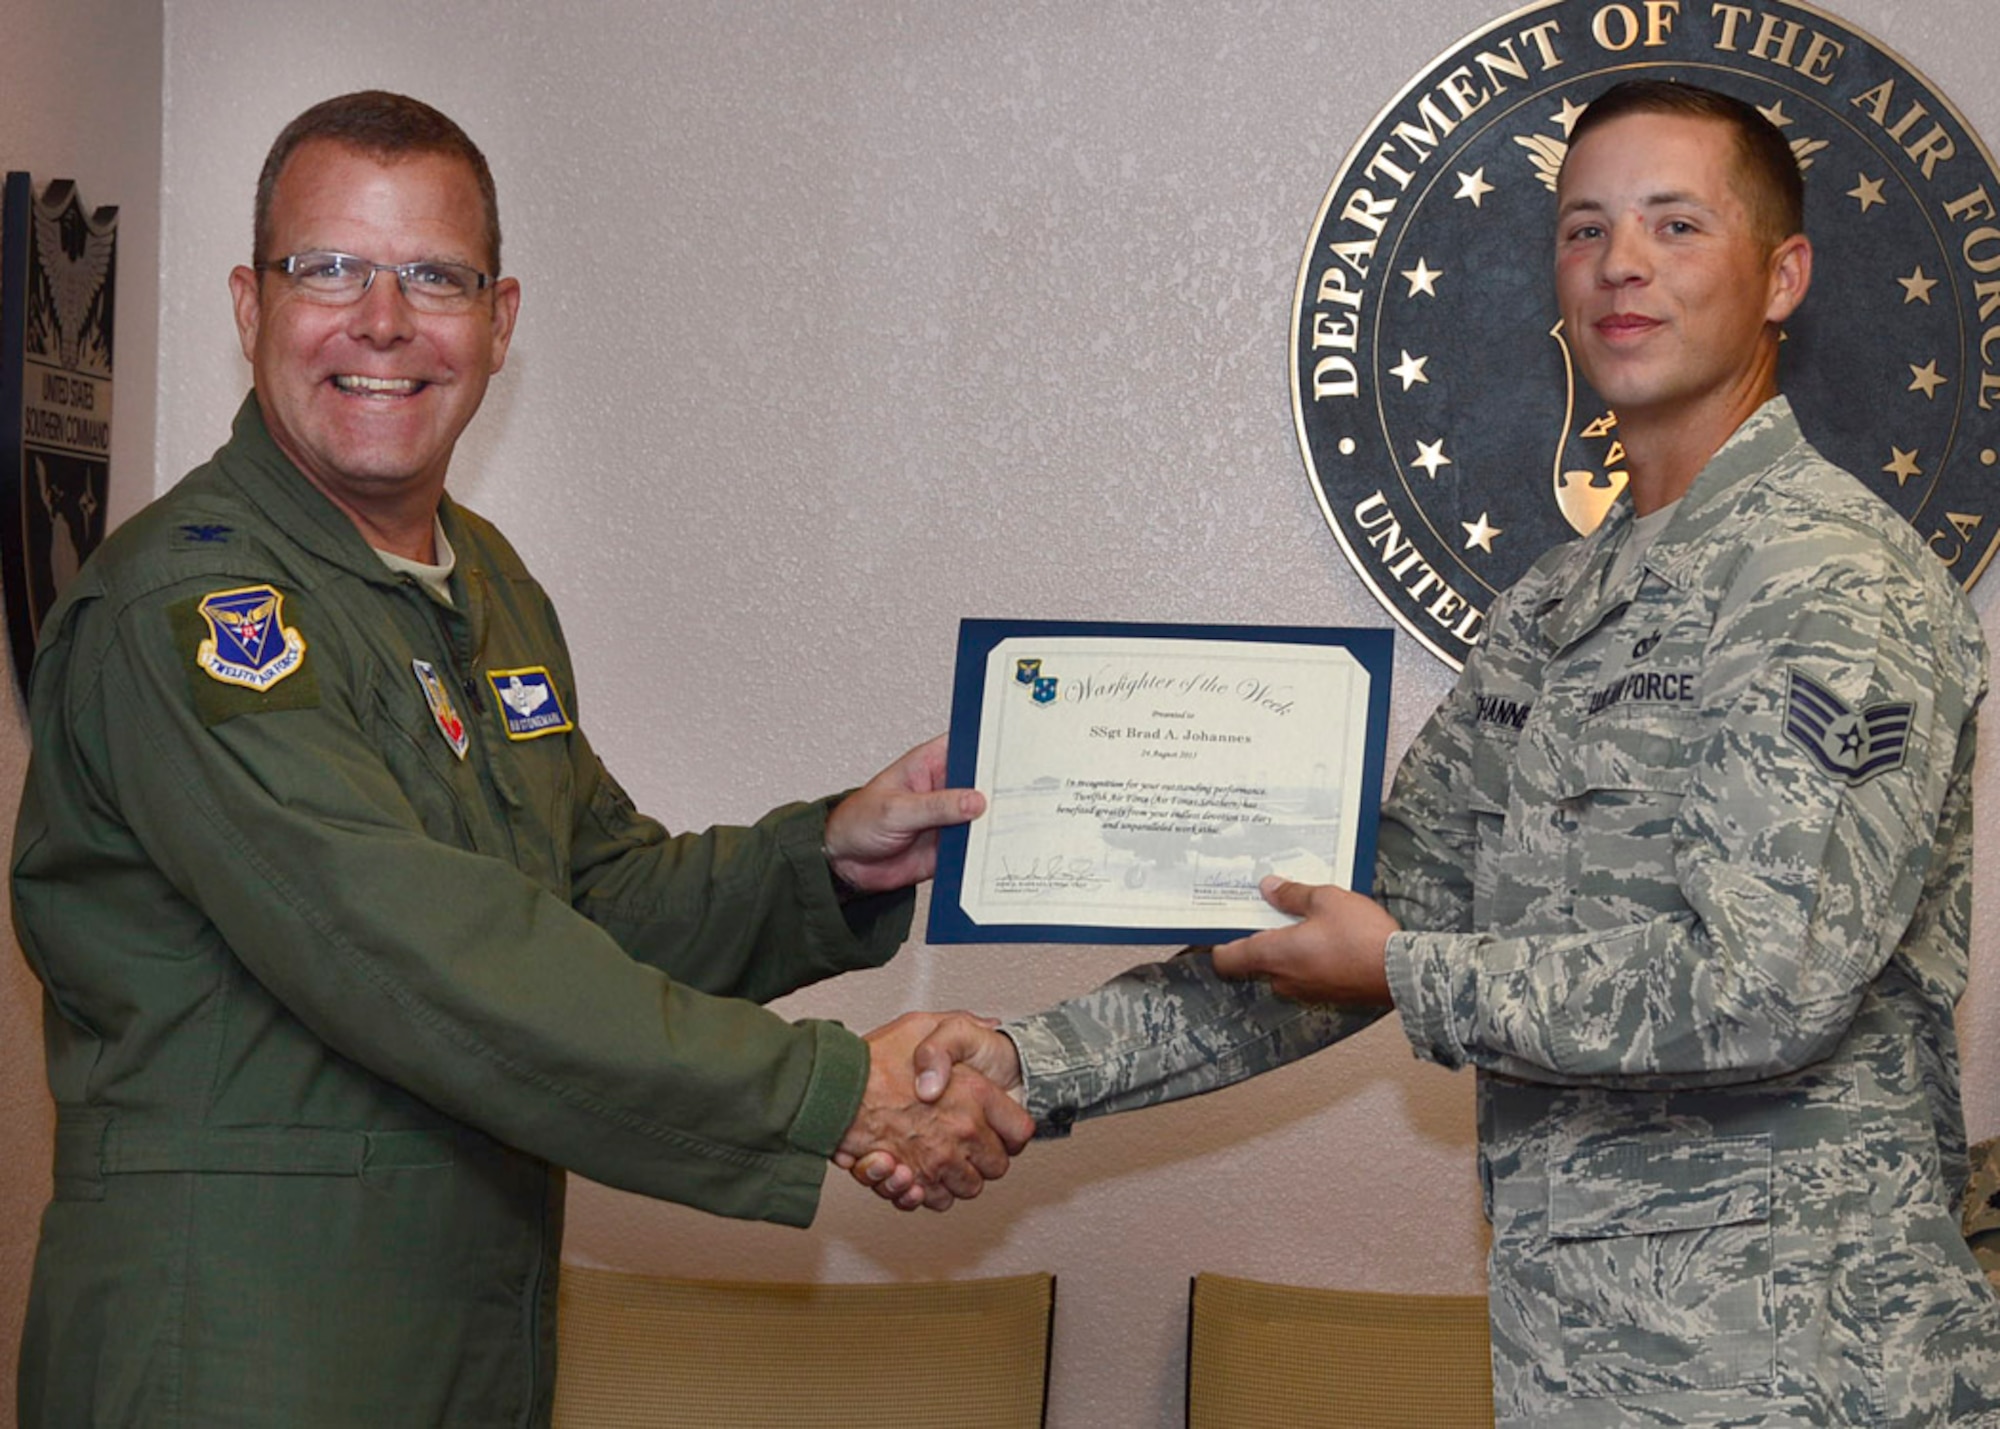 Col. Robert Stonemark, 12th Air Force (Air Forces Southern) chief of staff, presents Staff Sgt. Brad Johannes, 12th AF (AFSOUTH) manager of engineering operations, with the Warfighter of the Week certificate during a staff meeting at Davis-Monthan AFB, Ariz., Aug. 24, 2015. War Fighter of the Week is an opportunity for the Airmen who represent 12th AF (AFSOUTH) to share their own story. The Warfighter of the Week initiative aligns with the 12th AF (AFSOUTH) commander’s priority of creating a work environment where someone knows you both professionally and personally. (U.S. Air Force photo by Tech. Sgt. Heather Redman/Released)